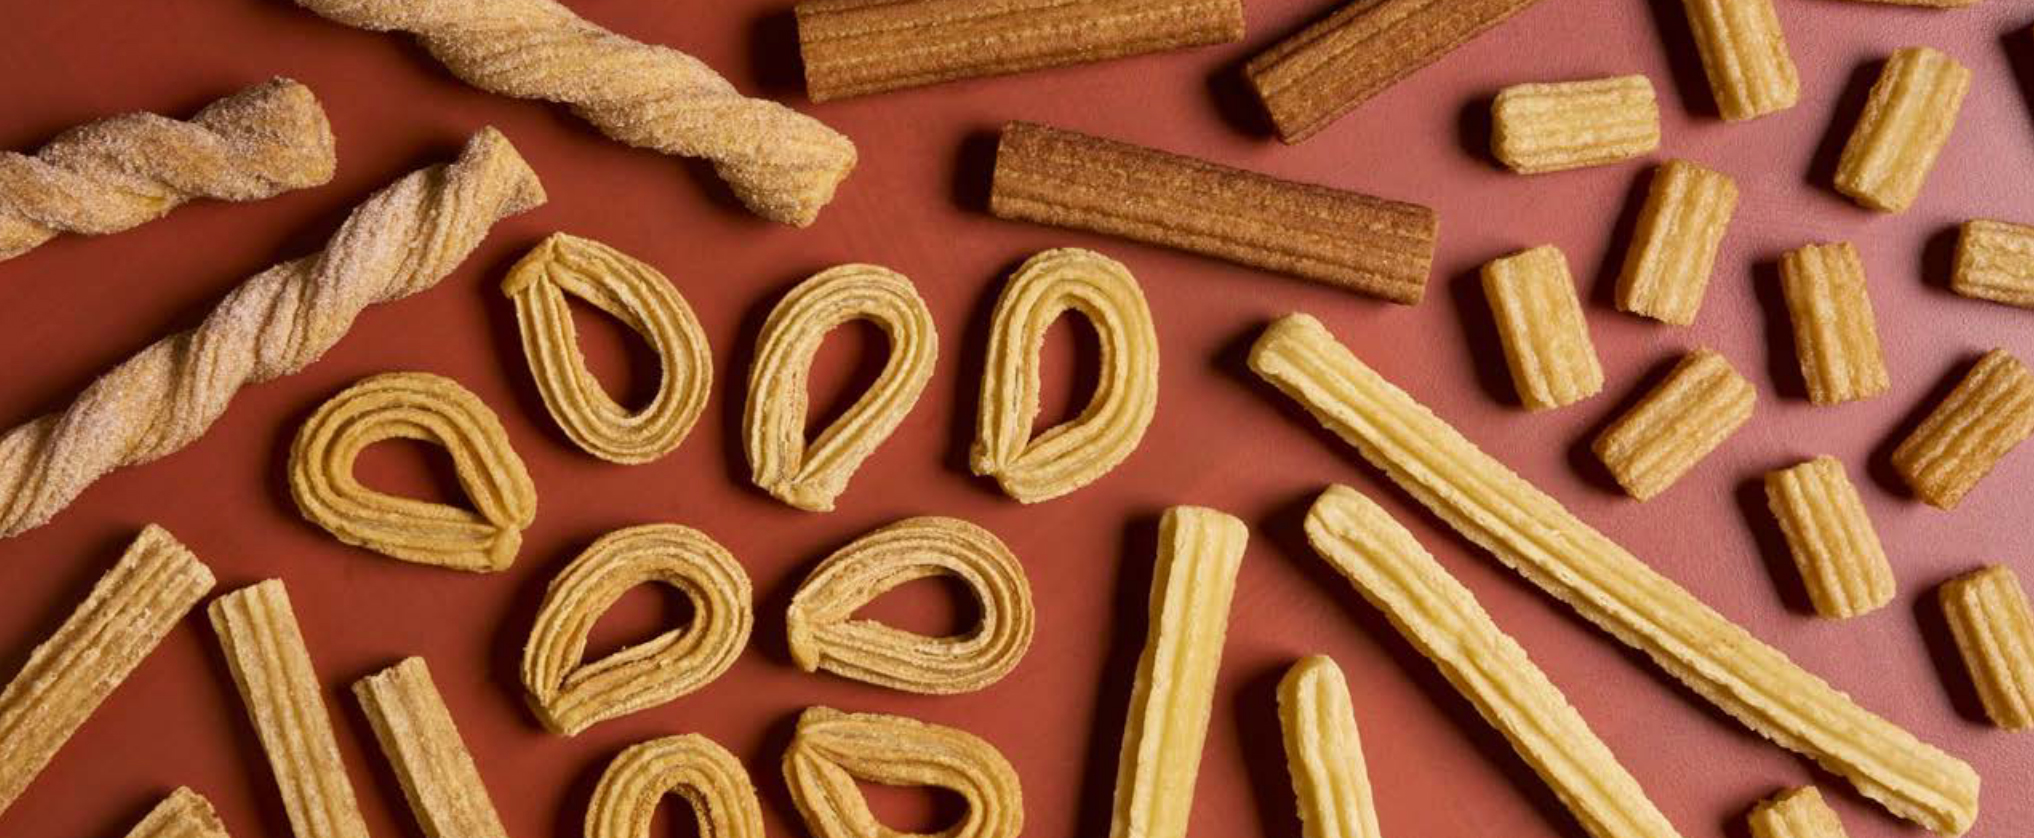 J&J Snack Foods Launches ¡Hola! Churros™ Brand to Foodservice Operators